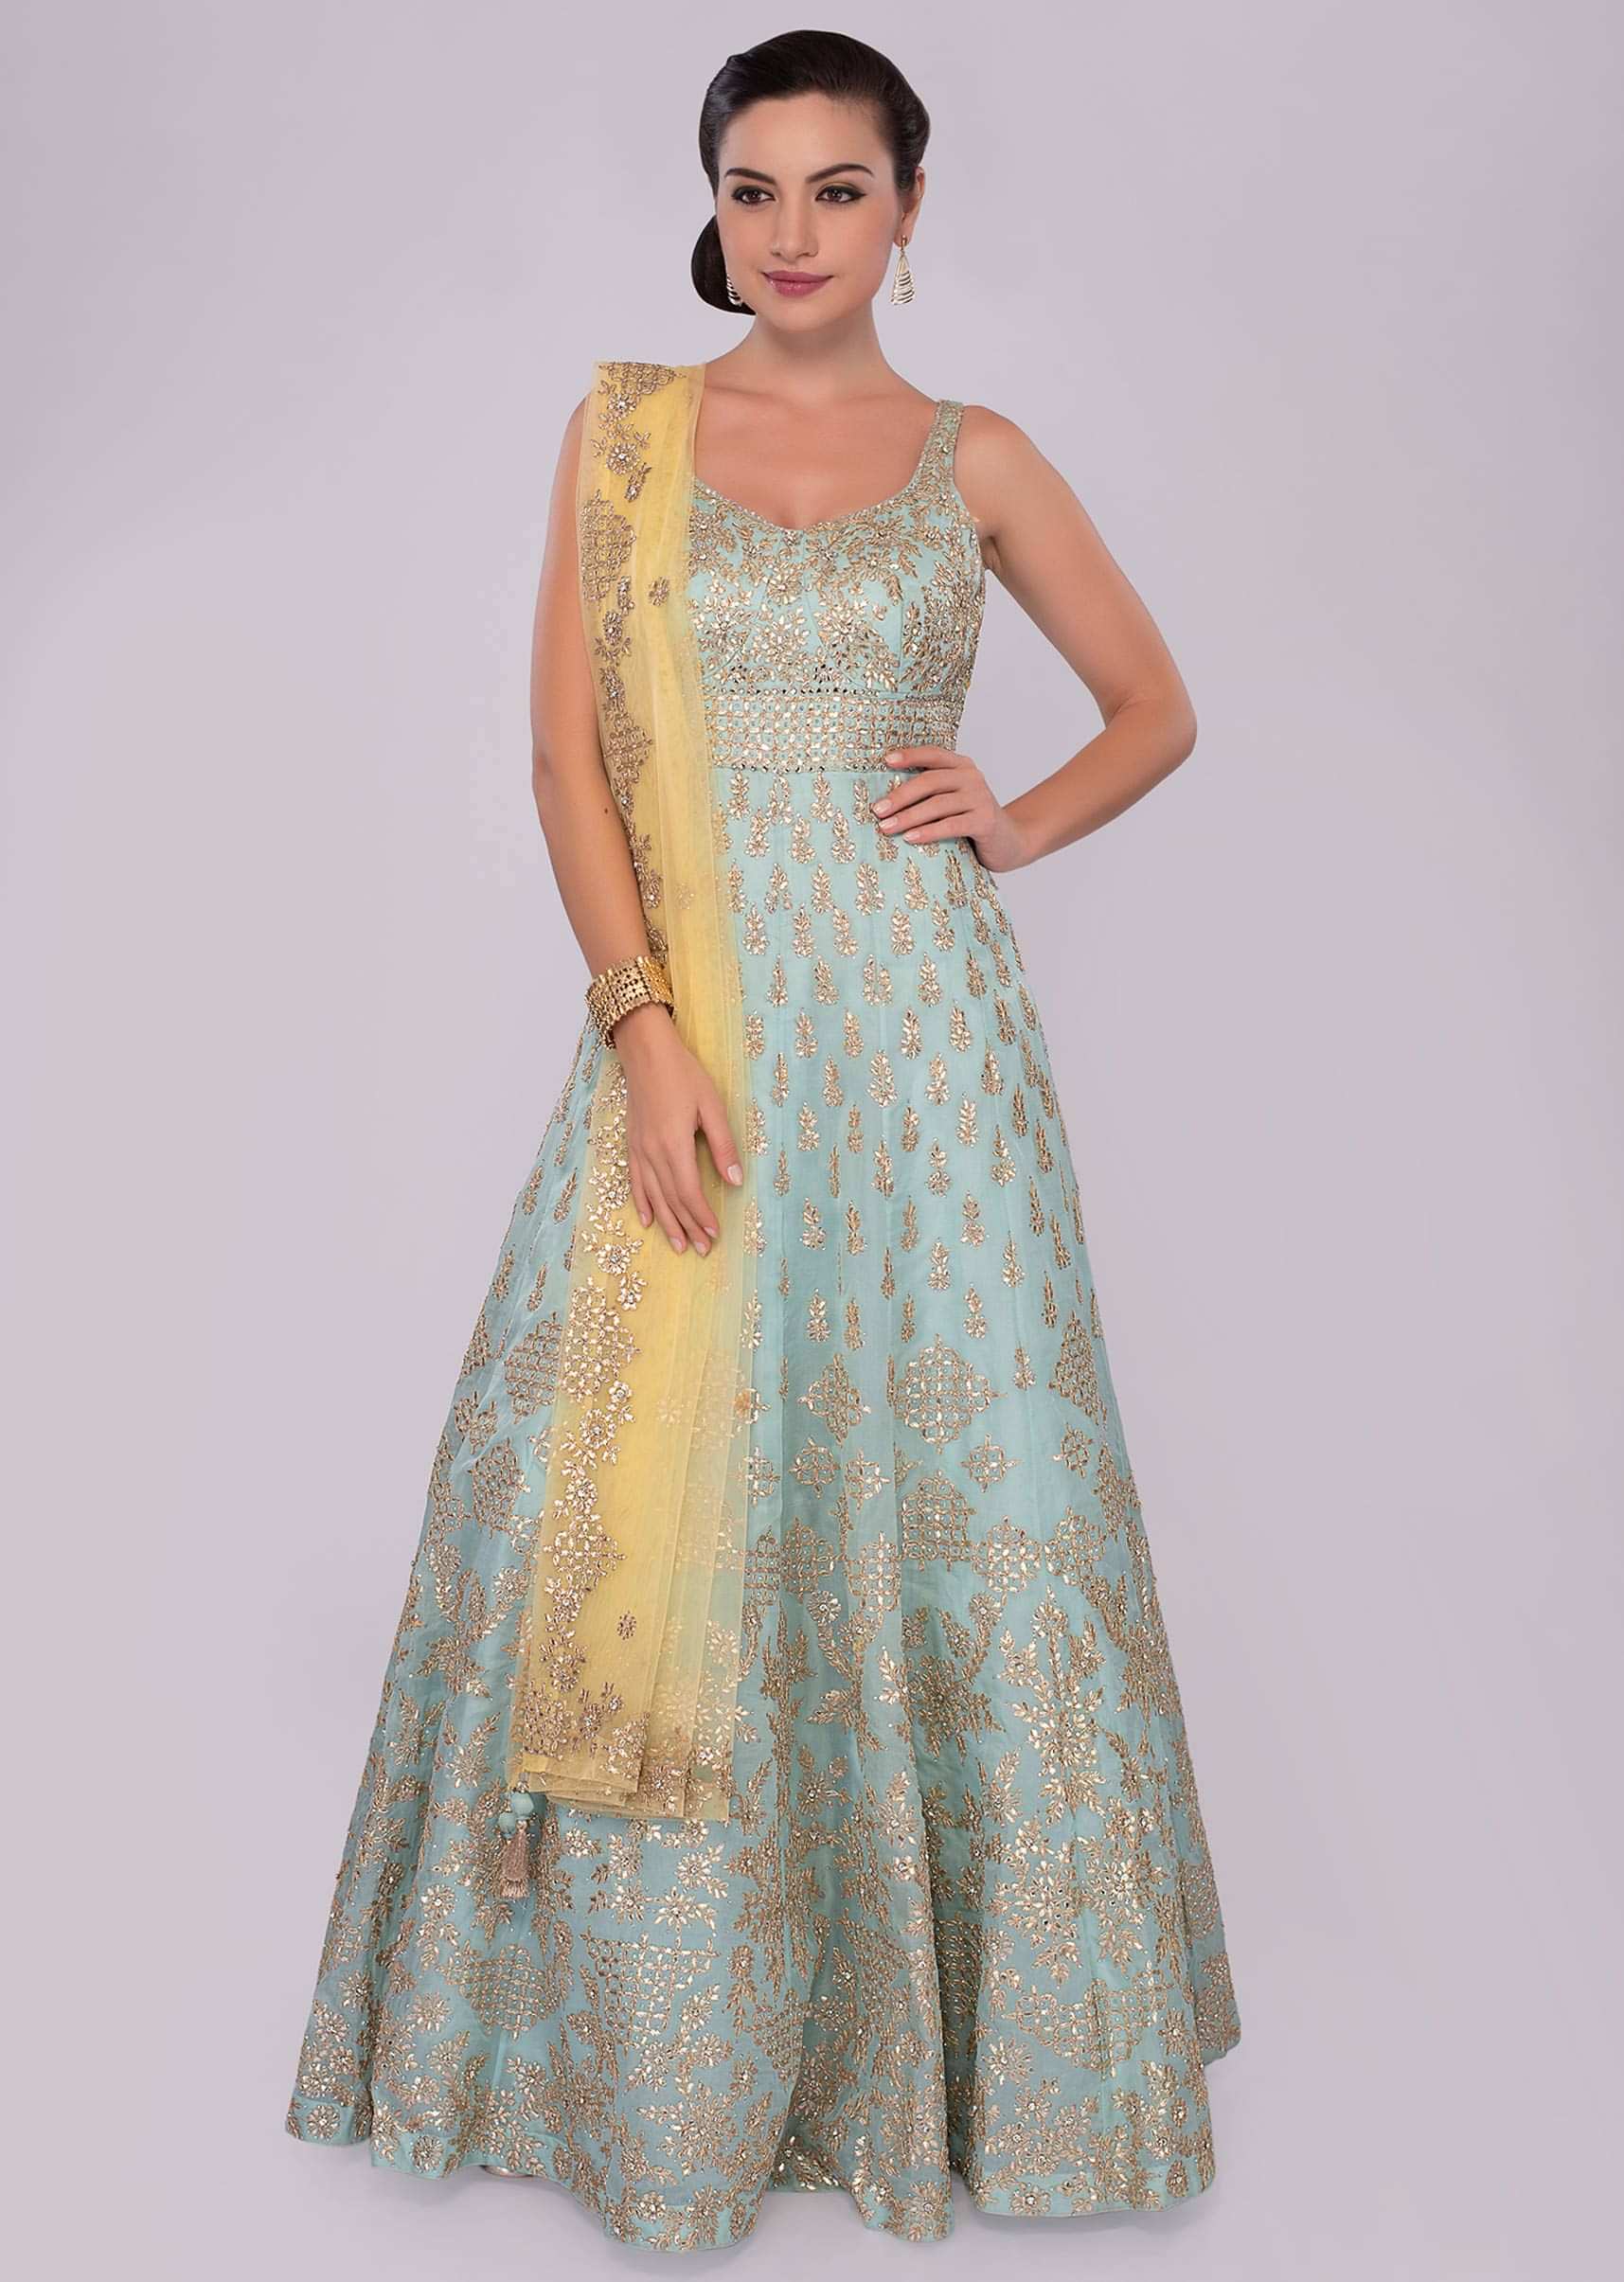 Turq blue anarkali gown in floral embroidery and butti